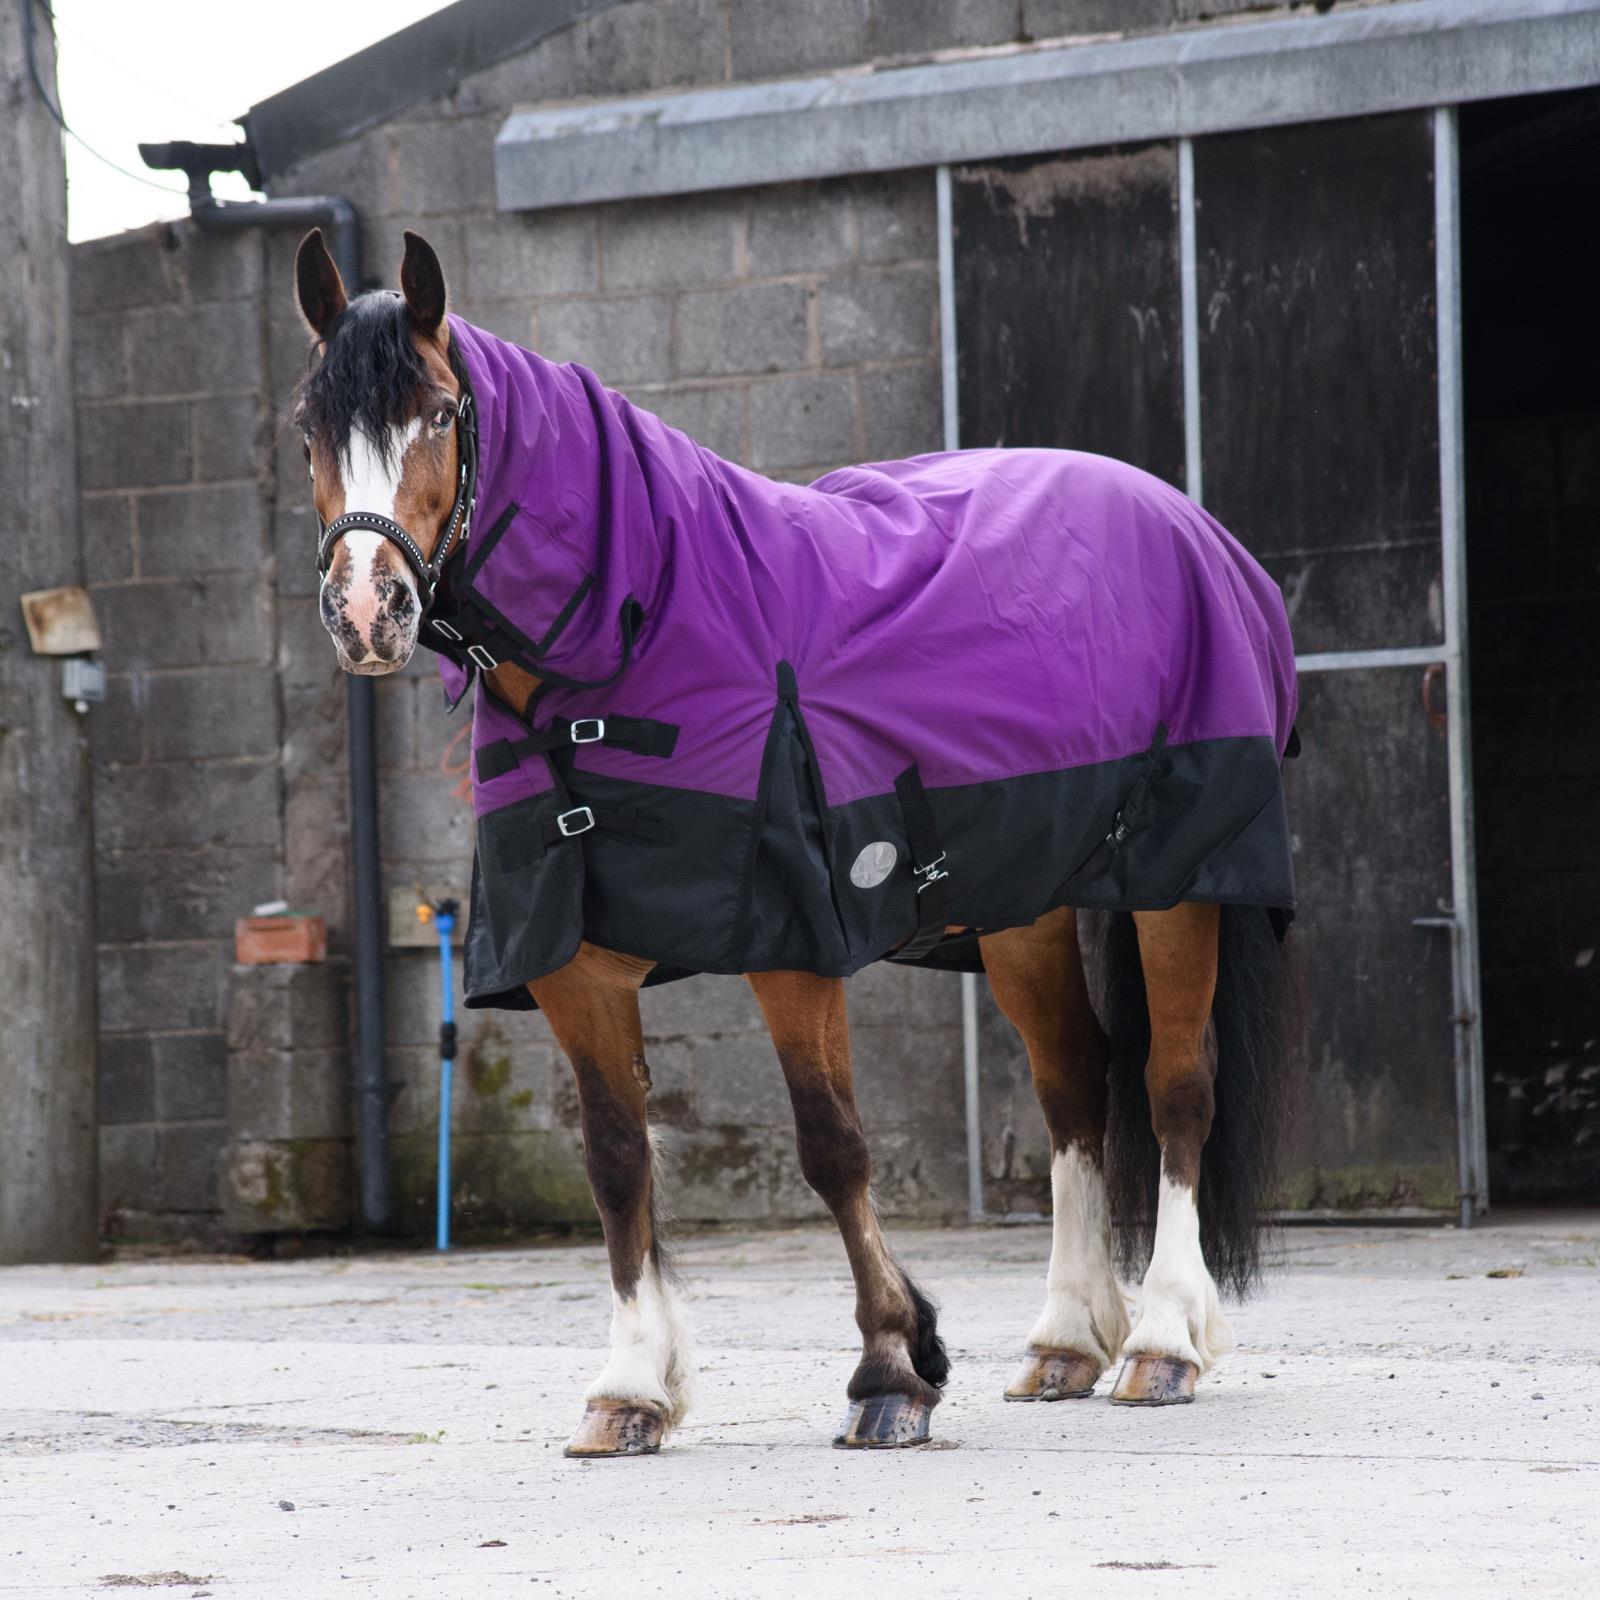 600D Outdoor Winter Turnout Horse Rugs 350G Fill Combo Neck Purple/Black 5'3-6'9 - Tack24